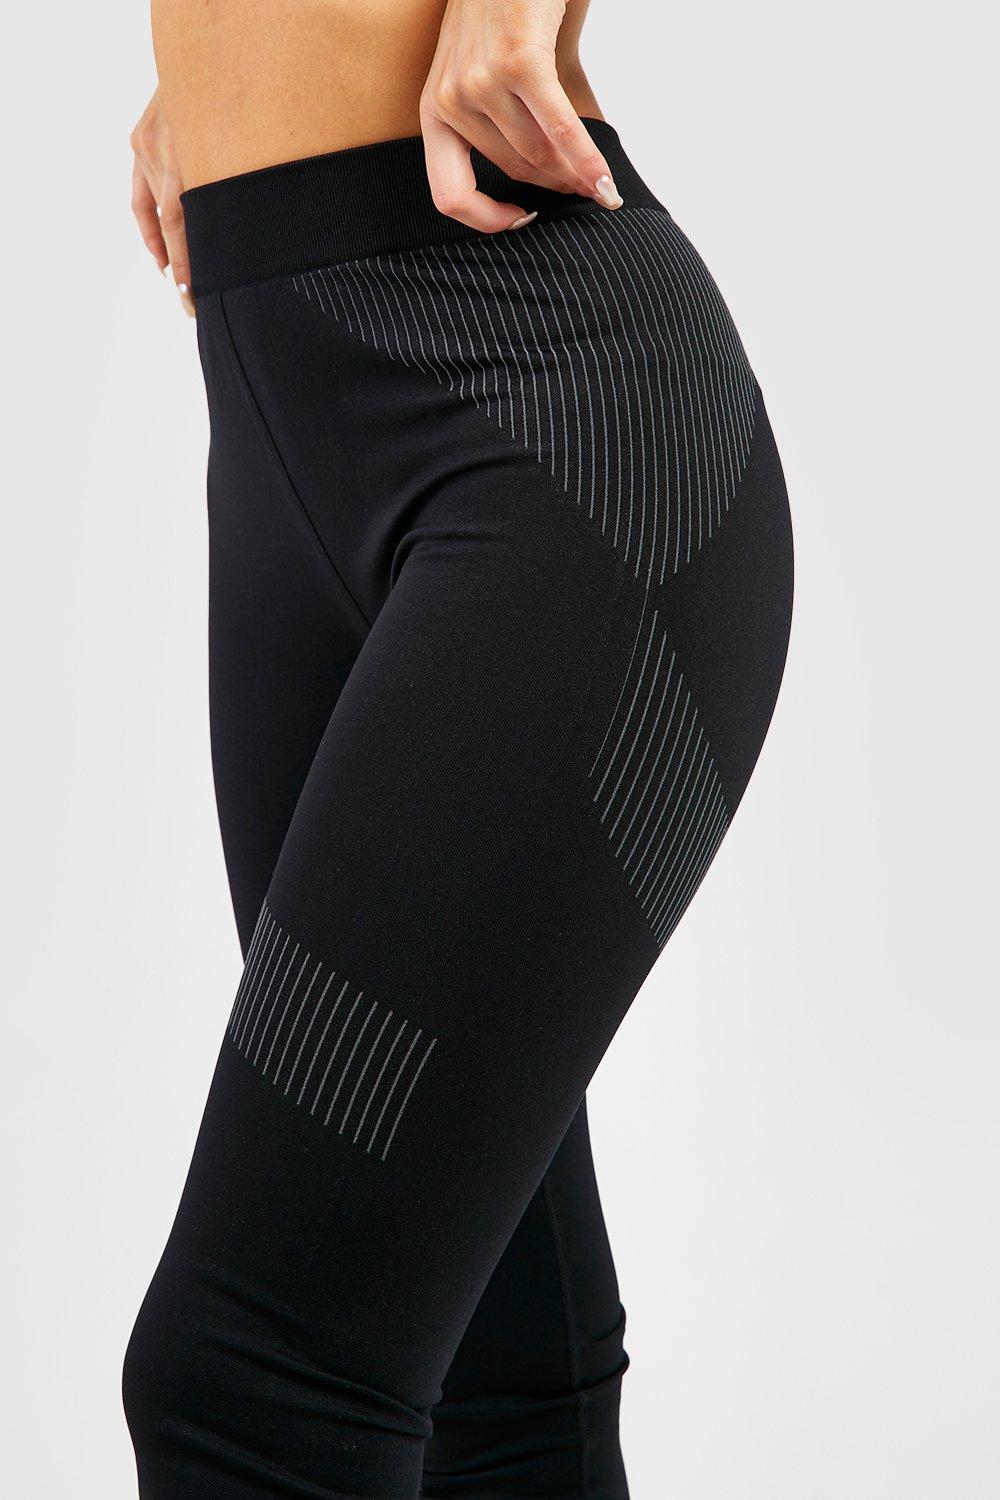 Thick Seamless Workout Leggings